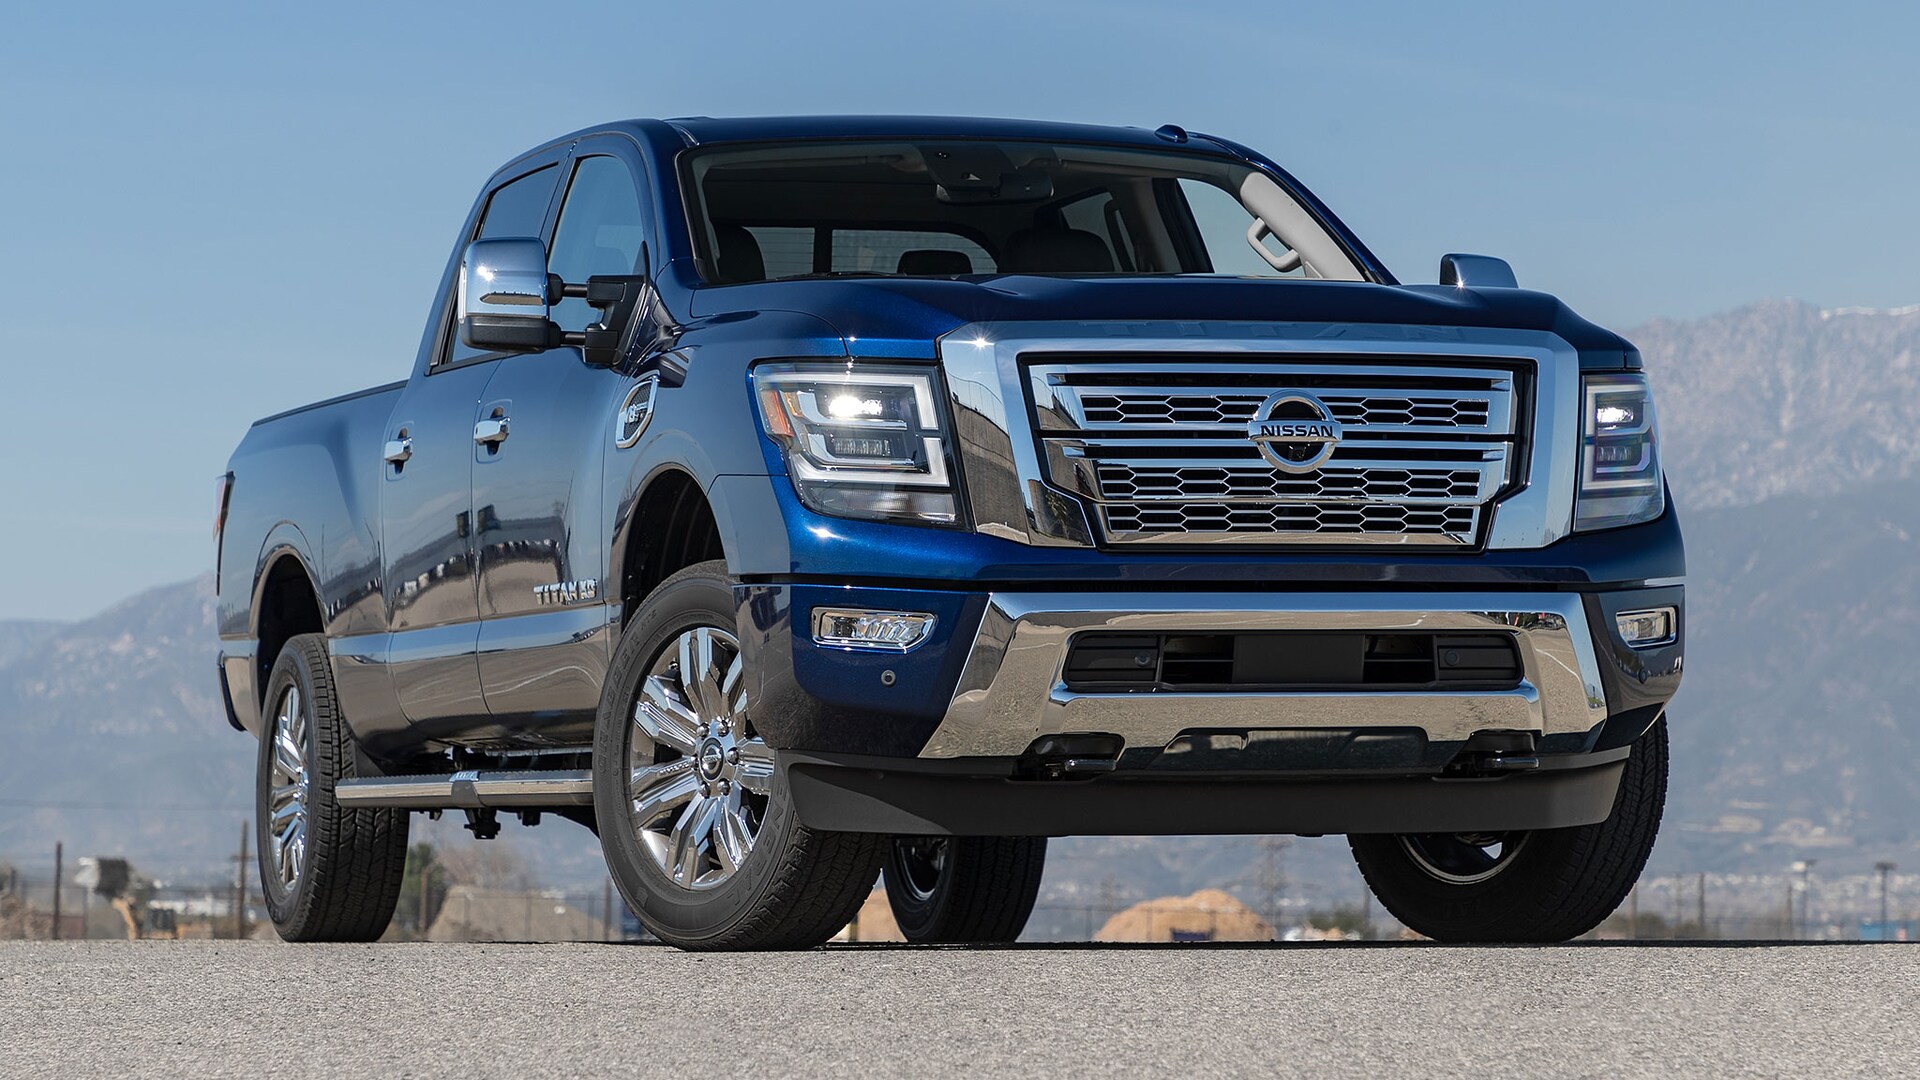 2023 Nissan Titan XD Prices, Reviews, and Photos - MotorTrend